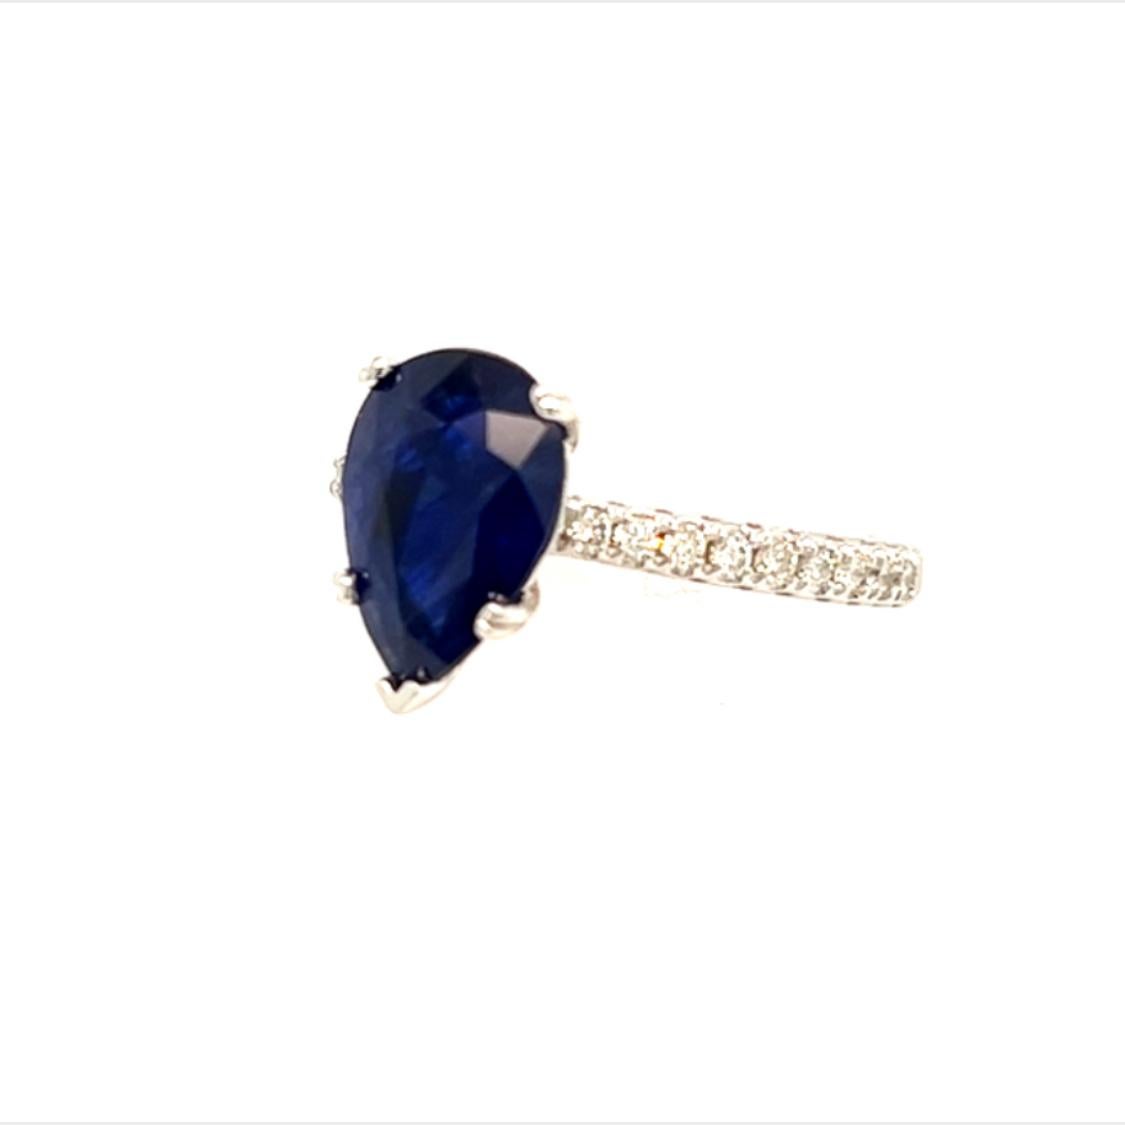 Sapphire Diamond Ring Size 6.5 14k Gold 2.77 TCW Certified For Sale 1